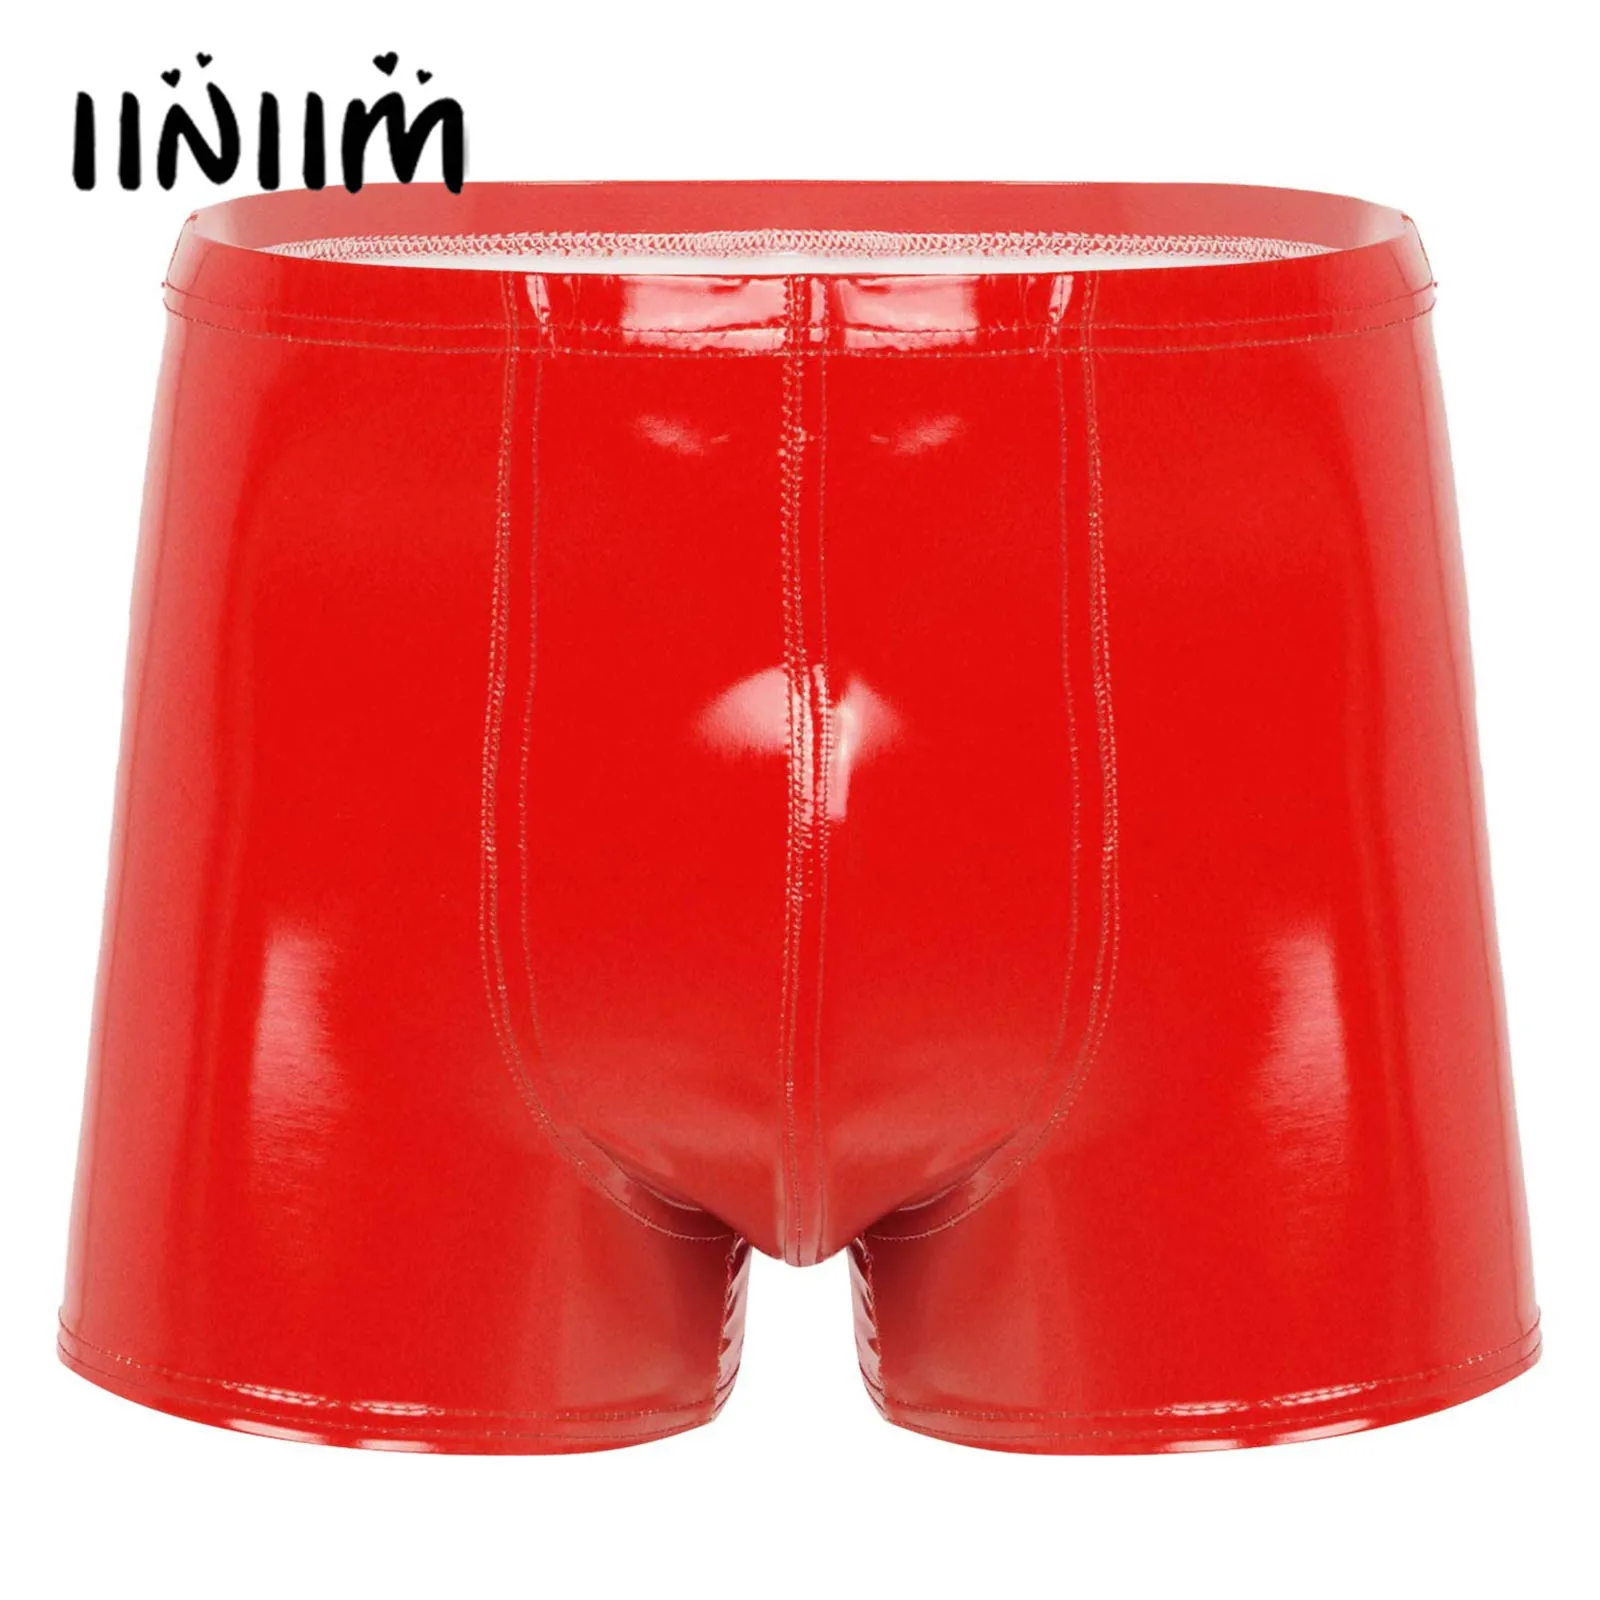 

Mens Wet Look Patent Leather Shorts Rave Outfit Bulge Pouch Boxer Briefs Elastic Waistband Short Pants Clubwear for Pole Dancing